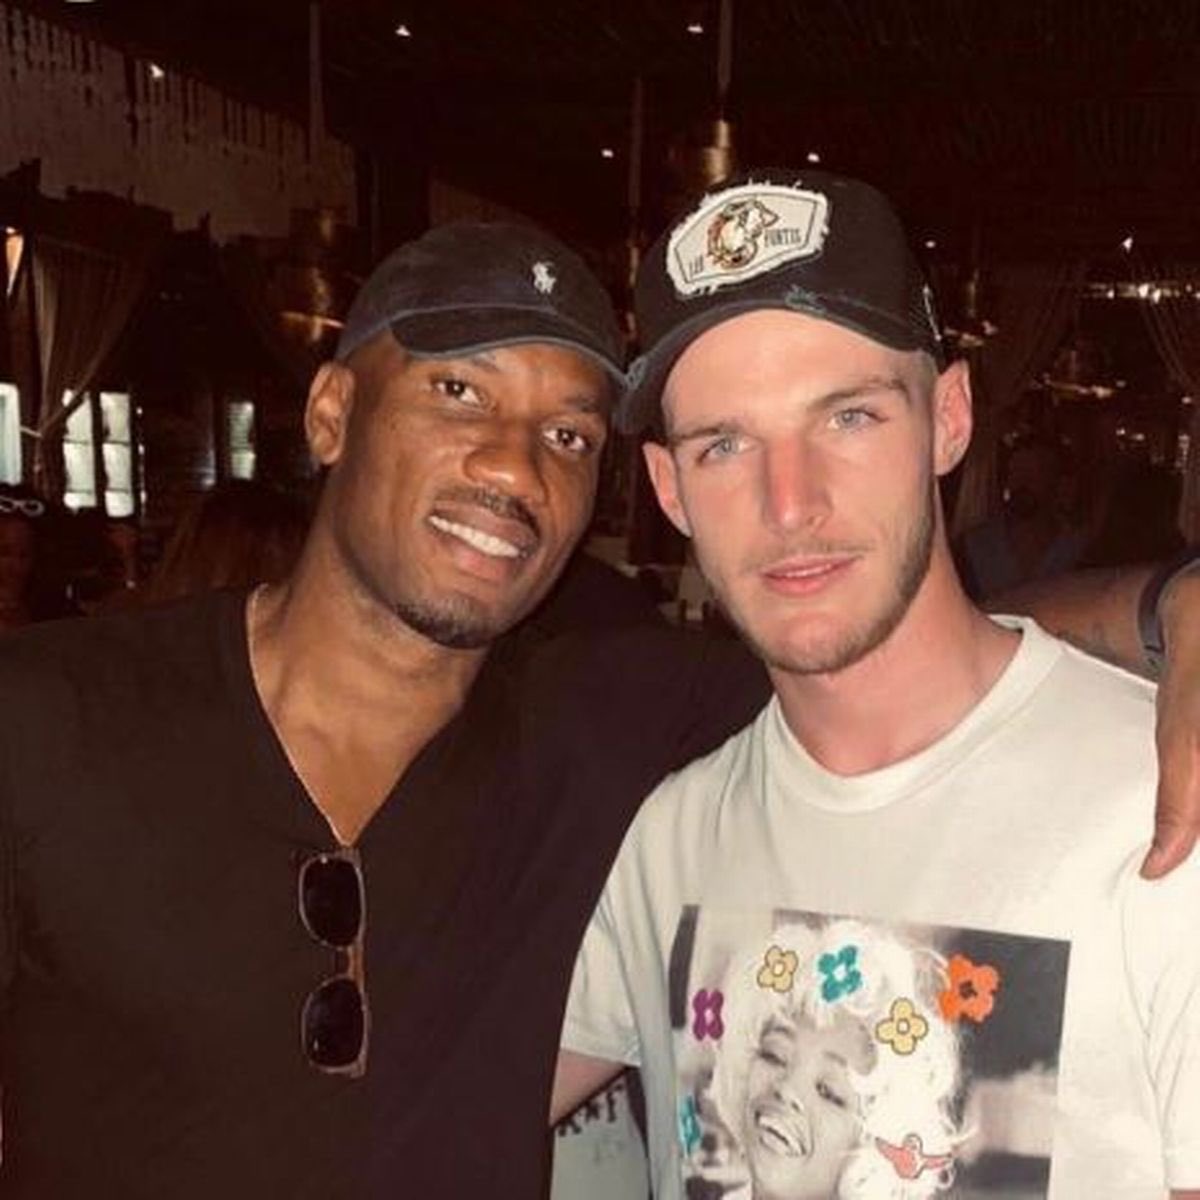 It’s clear to see who Rice really wants to move to though, CHELSEA! As shown here, Rice had a photo taken with his childhood hero Didier Drogba.Unfortunately we all know what happens next after footballers take pictures with their hero’s